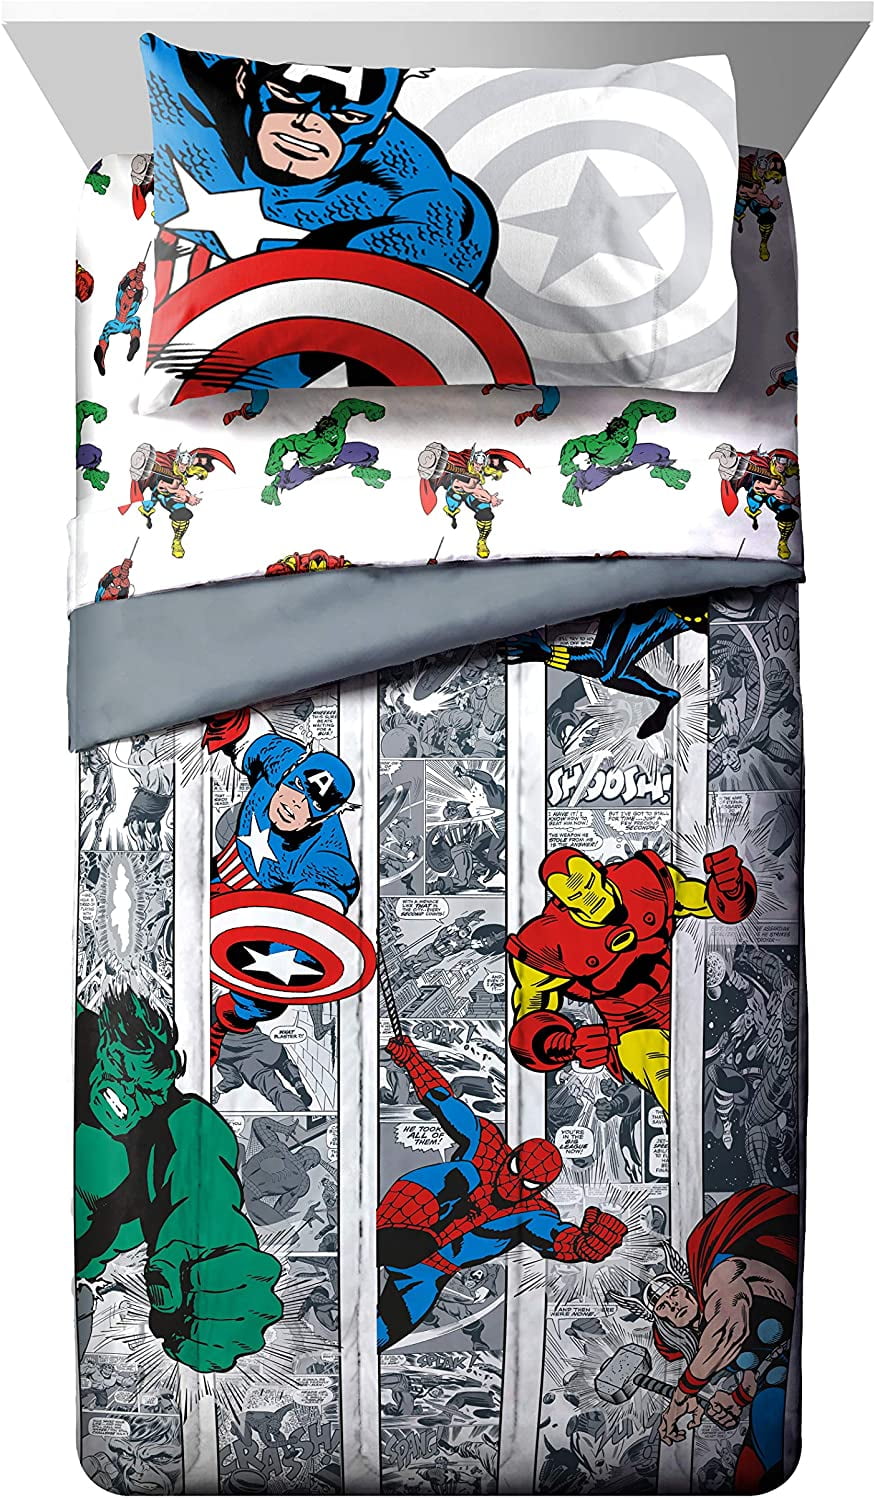 Iron Man Jay Franco Marvel Avengers Heroes Amigos 4 Piece Toddler Bed Set Bedding Features Captain America and Spiderman Hulk Super Soft Microfiber Bed Set Official Marvel Product 